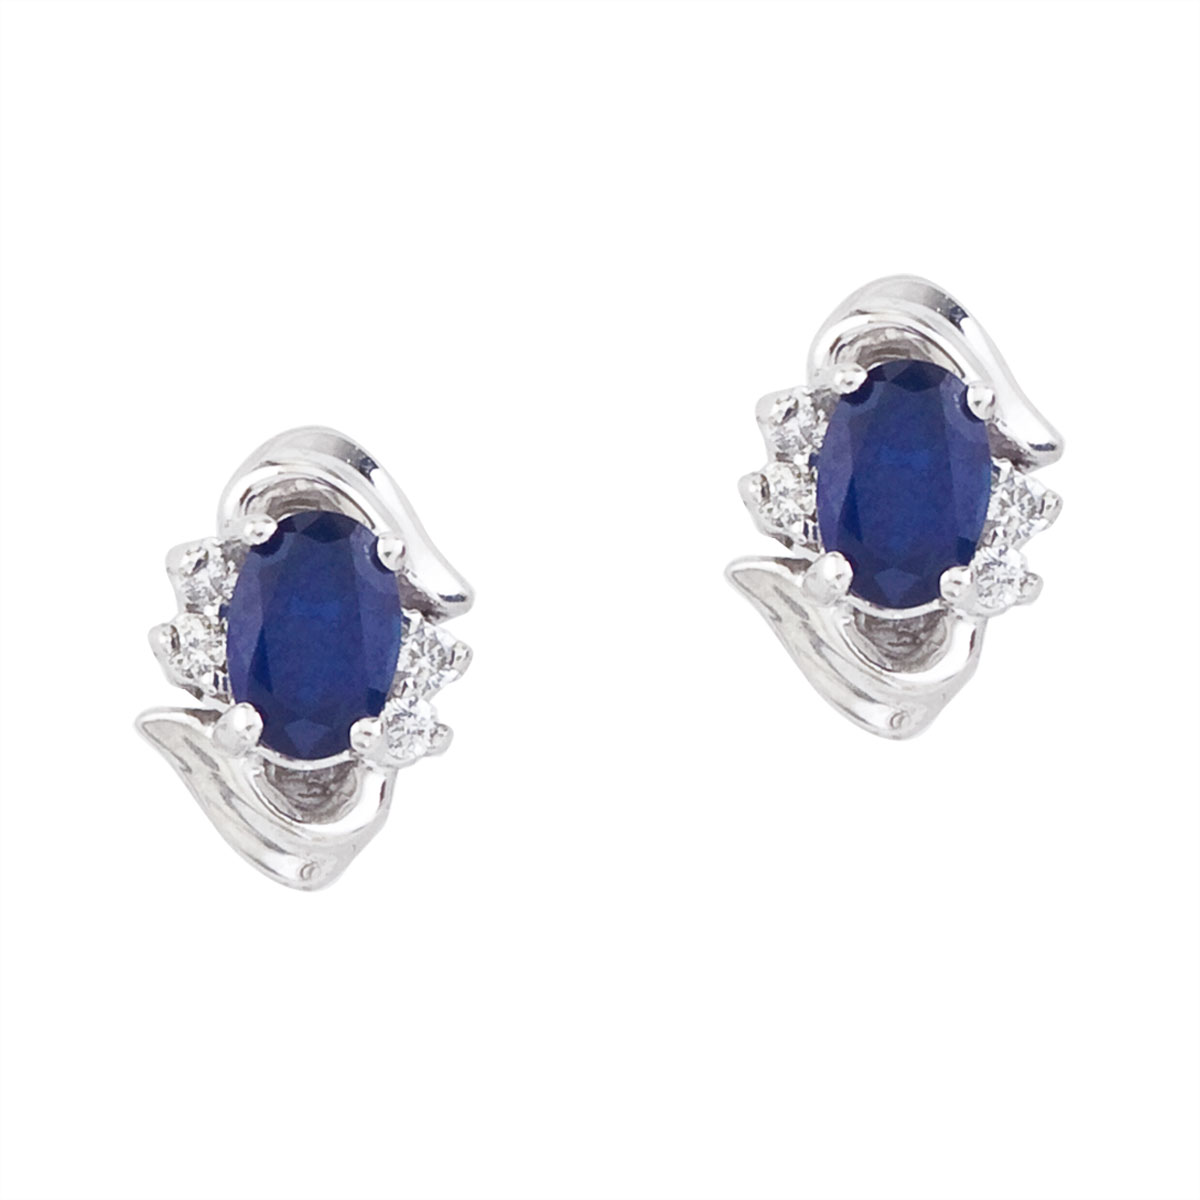 JCX2313: Stunning 14k white gold and sapphire earrings. Featuring natural 6x4 mm oval saphires and .11 total carat diamonds.